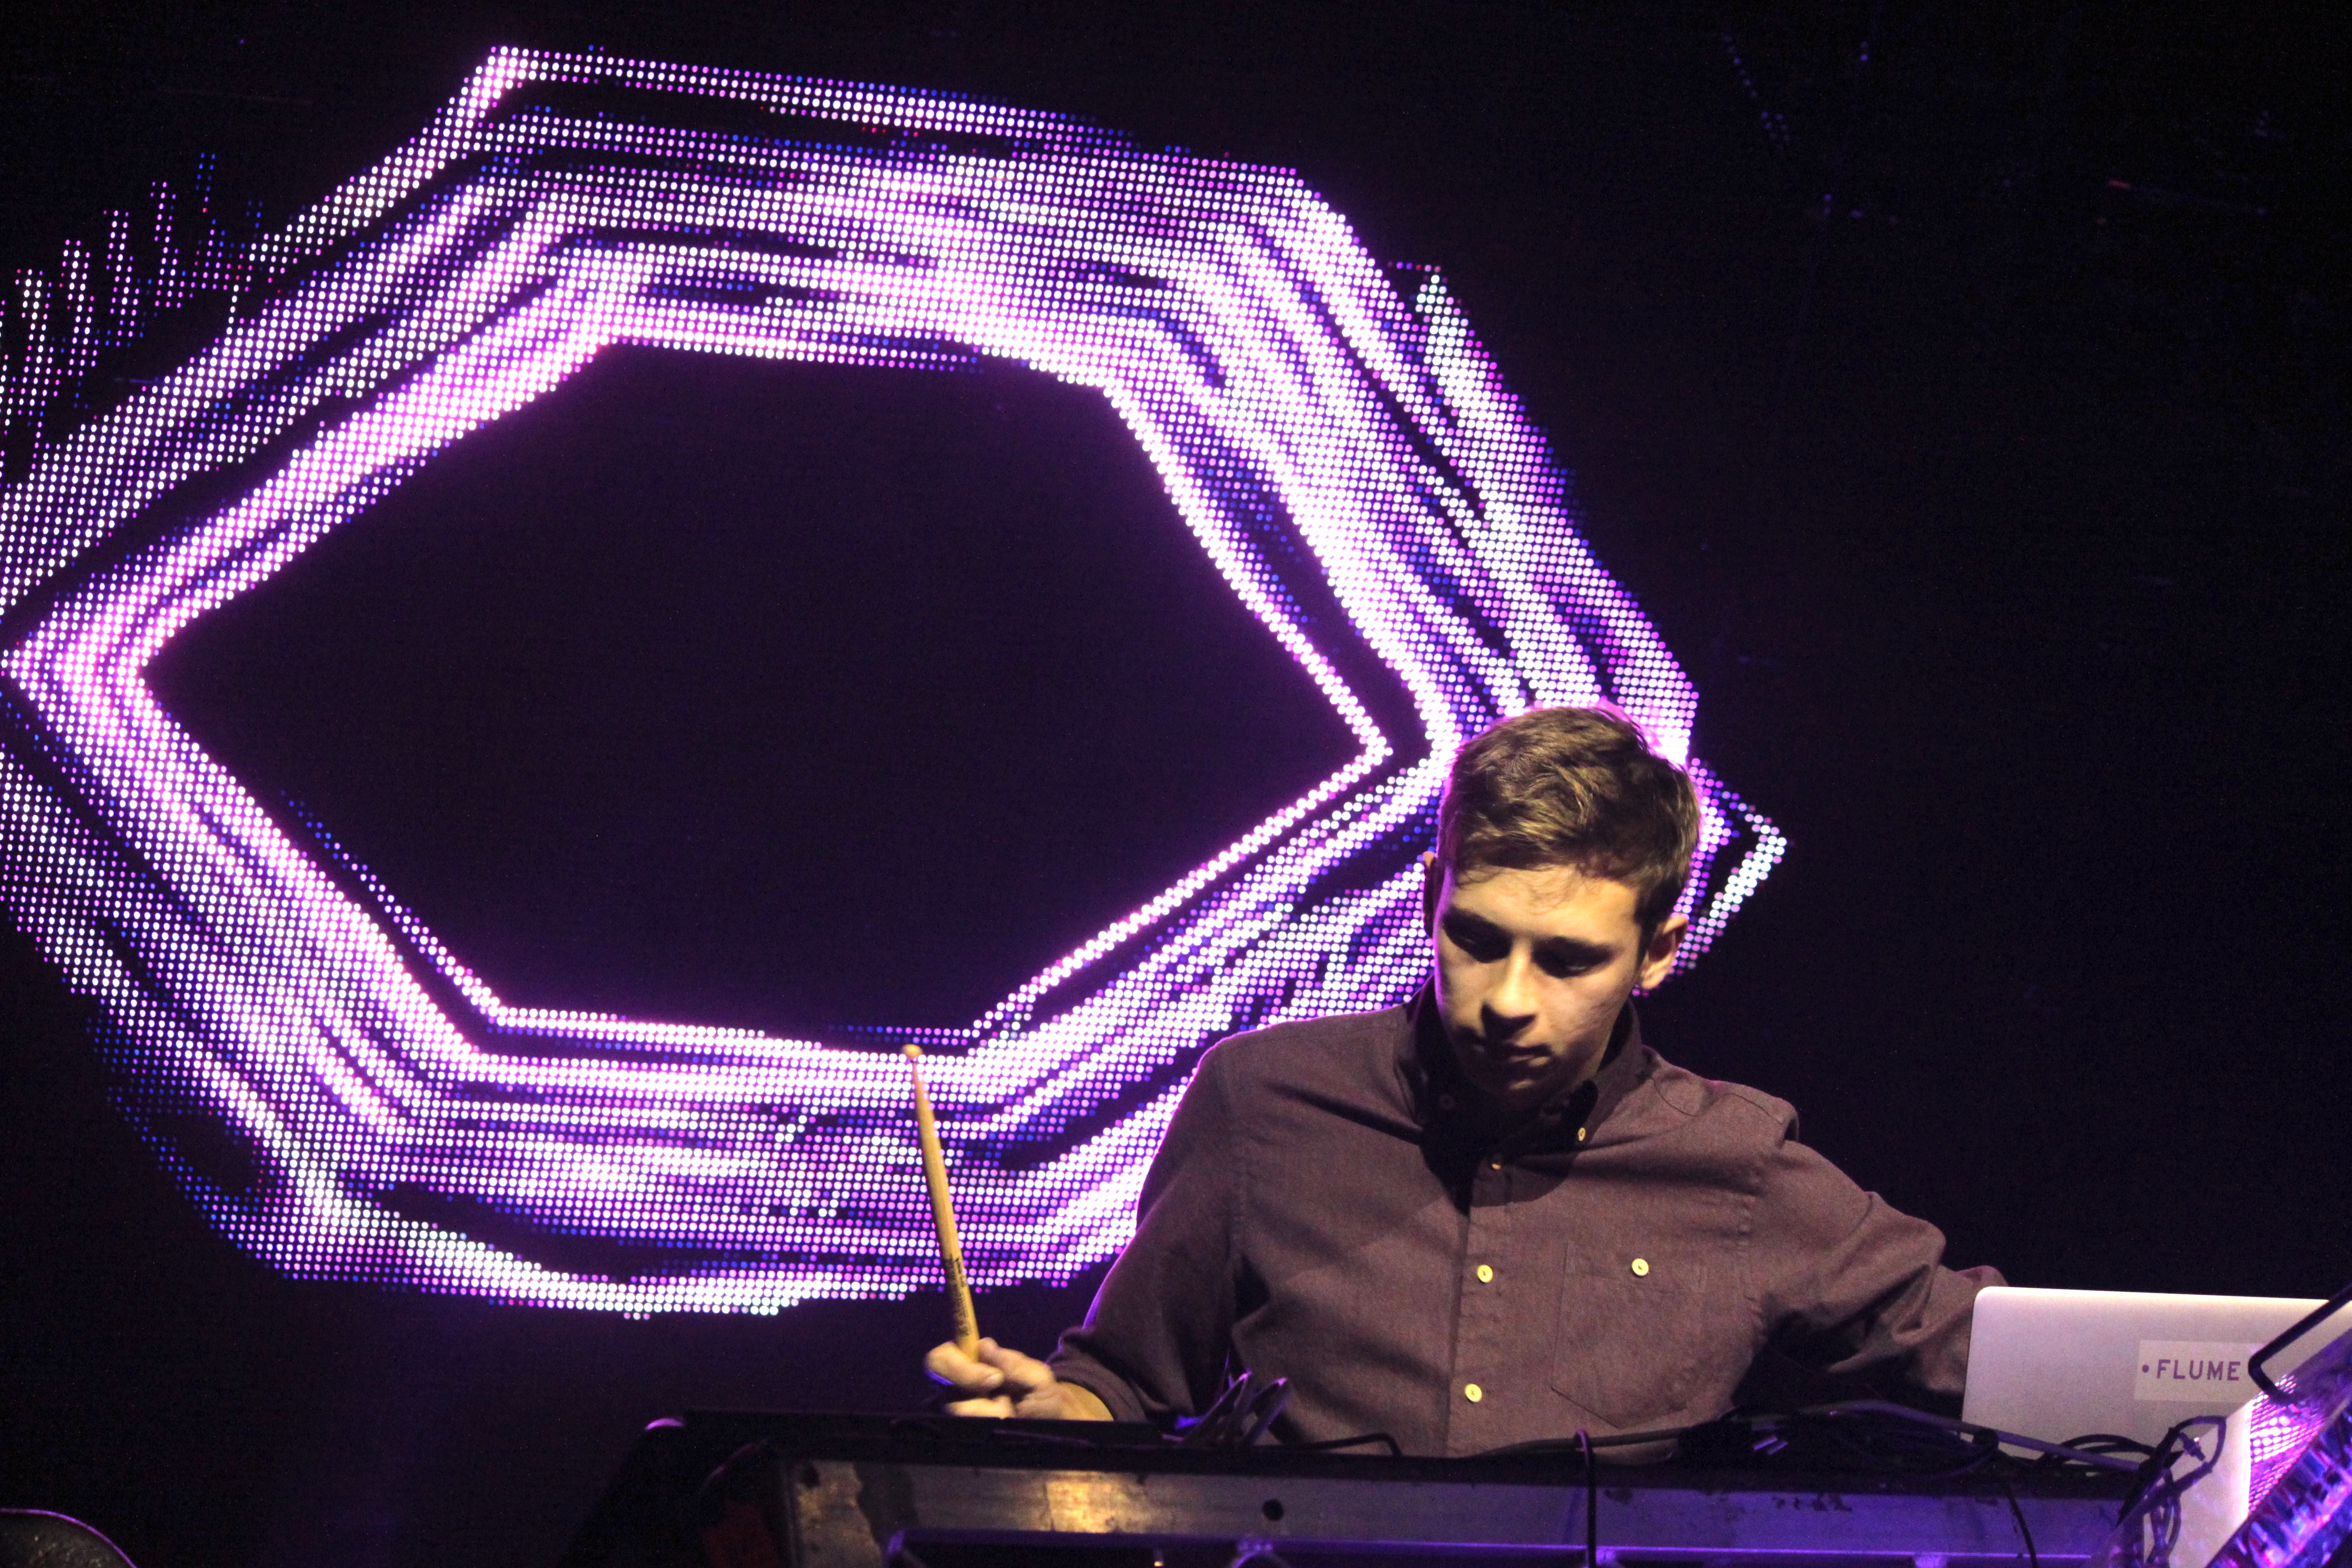 Relive Flume's Amazing Set From SXSW's Hype Hotel [Video]